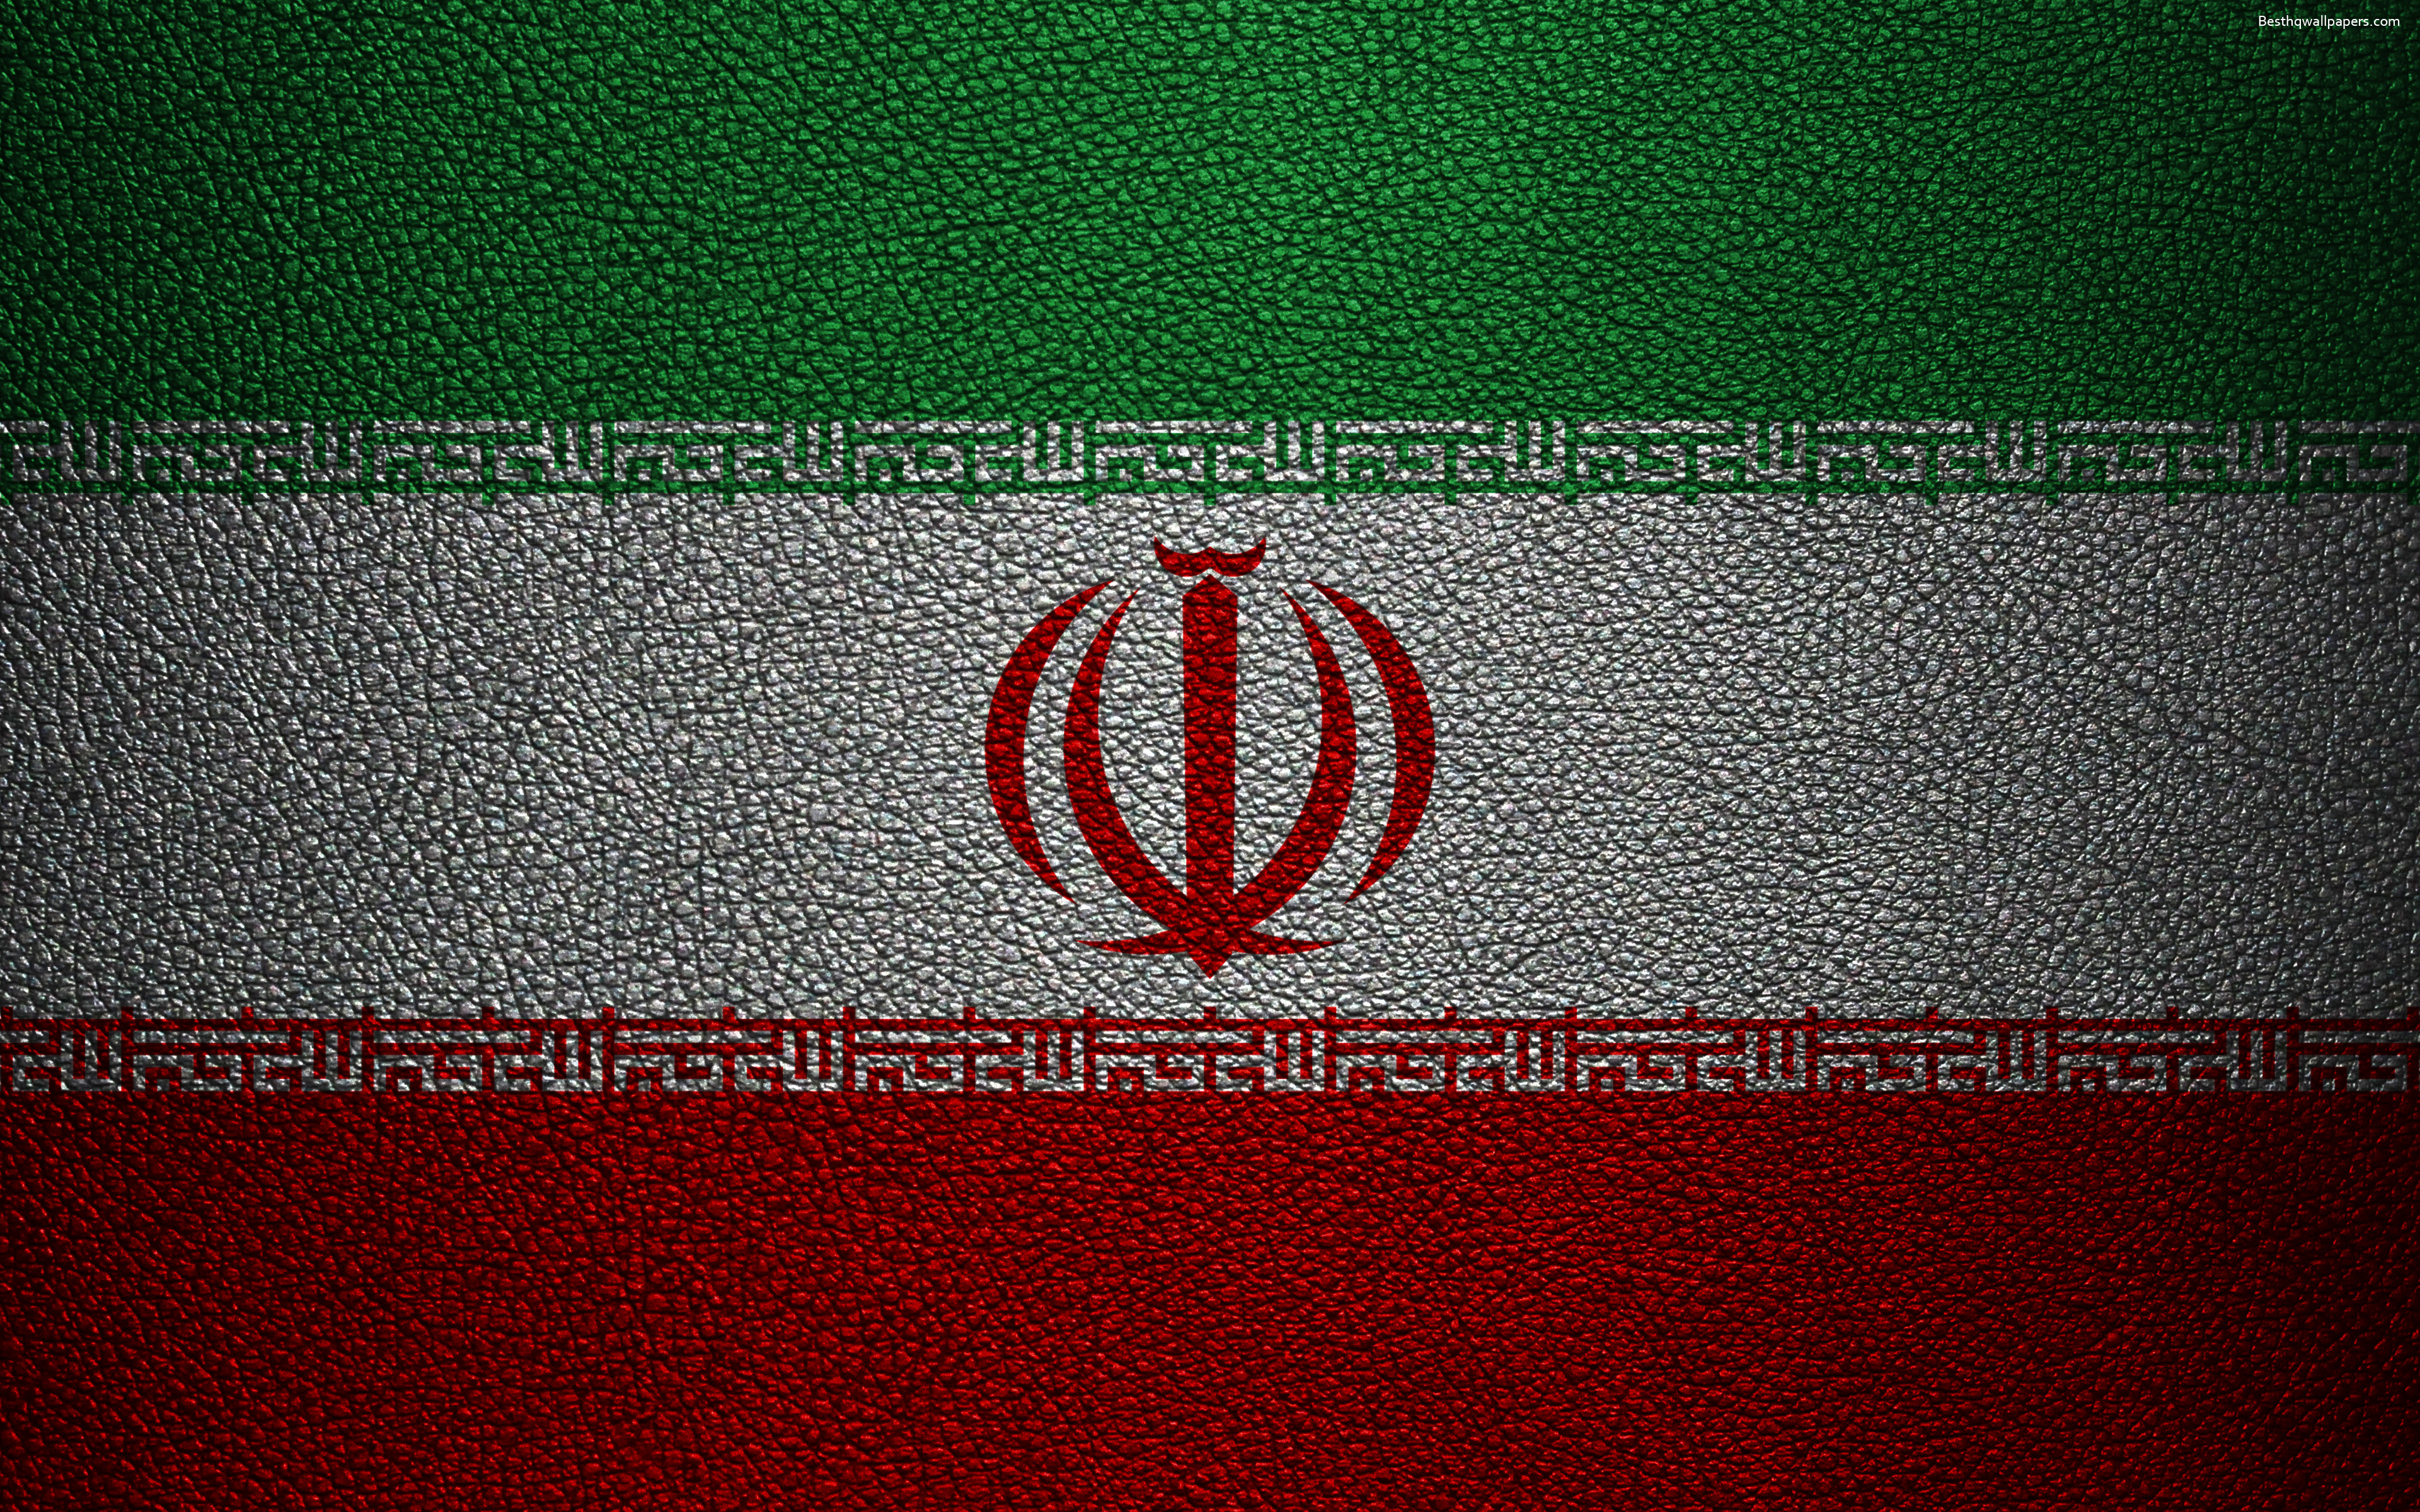 Download wallpaper Flag of Iran, 4K, leather texture, Iranian flag, Asia, world flags, Iran for desktop with resolution 3840x2400. High Quality HD picture wallpaper